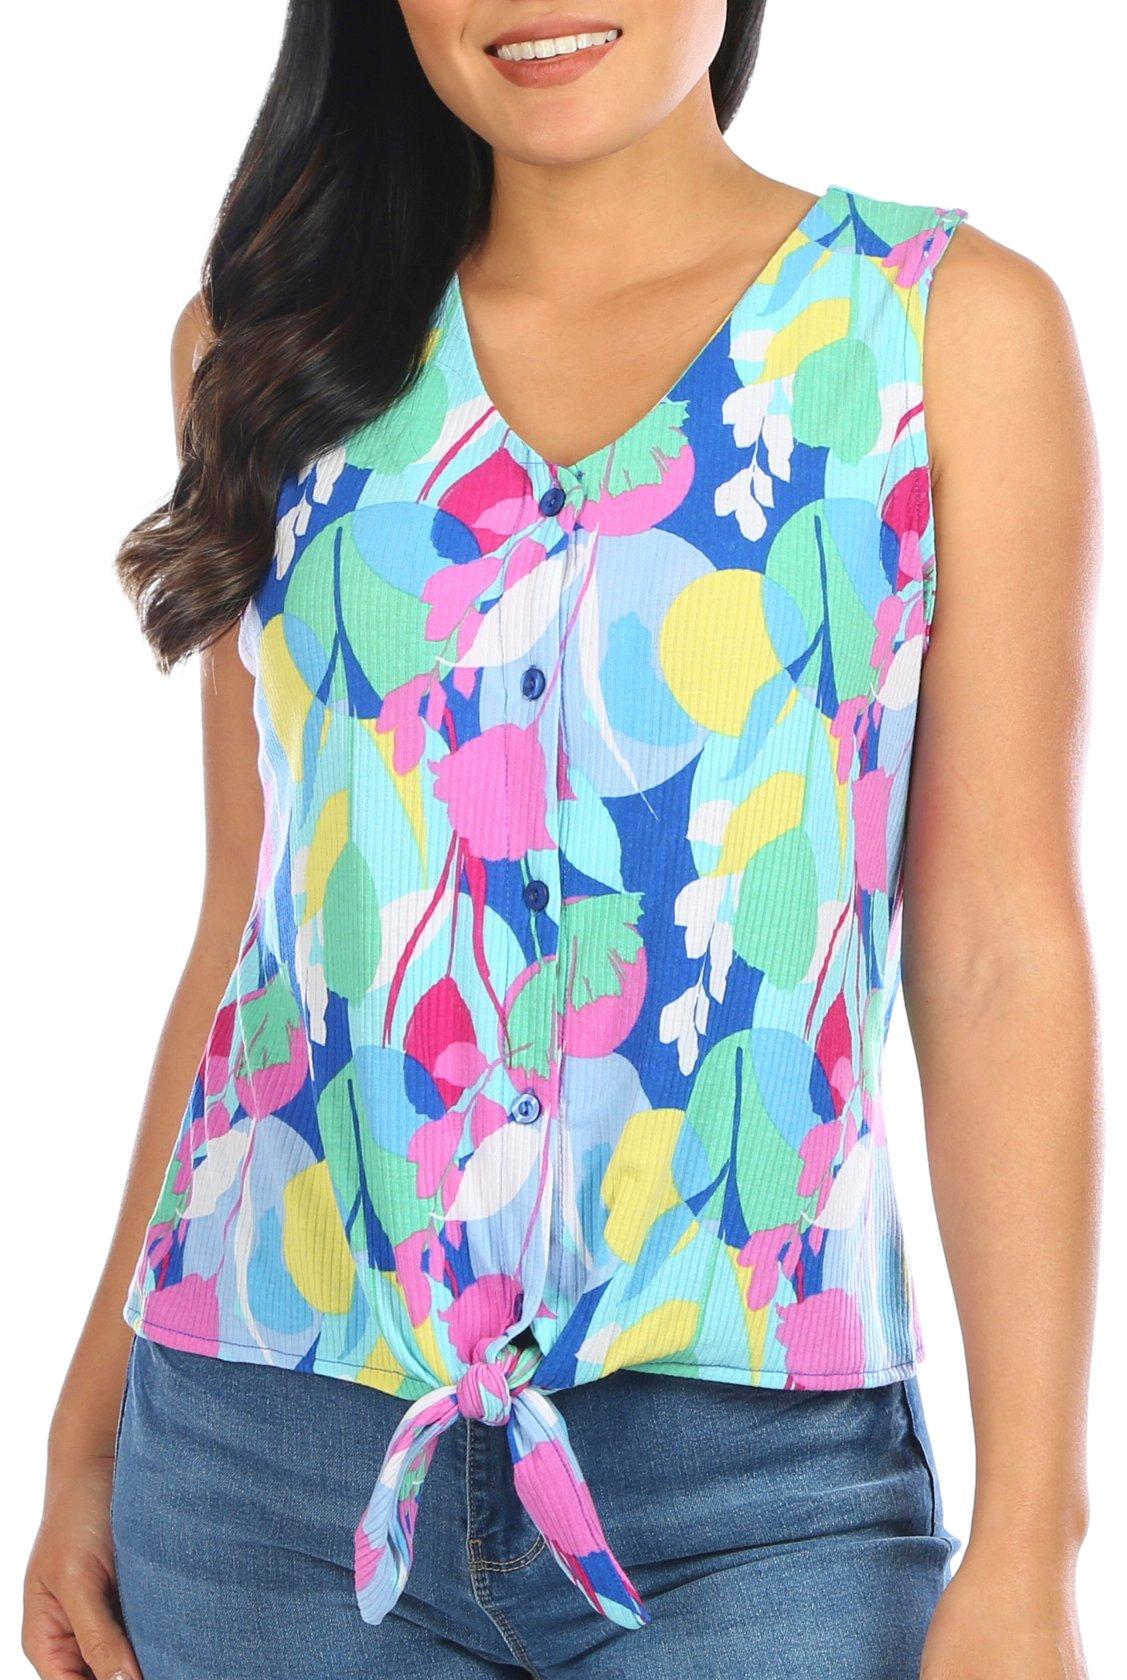 Juniper + Lime Womens Colorful Tie Front Sleeveless